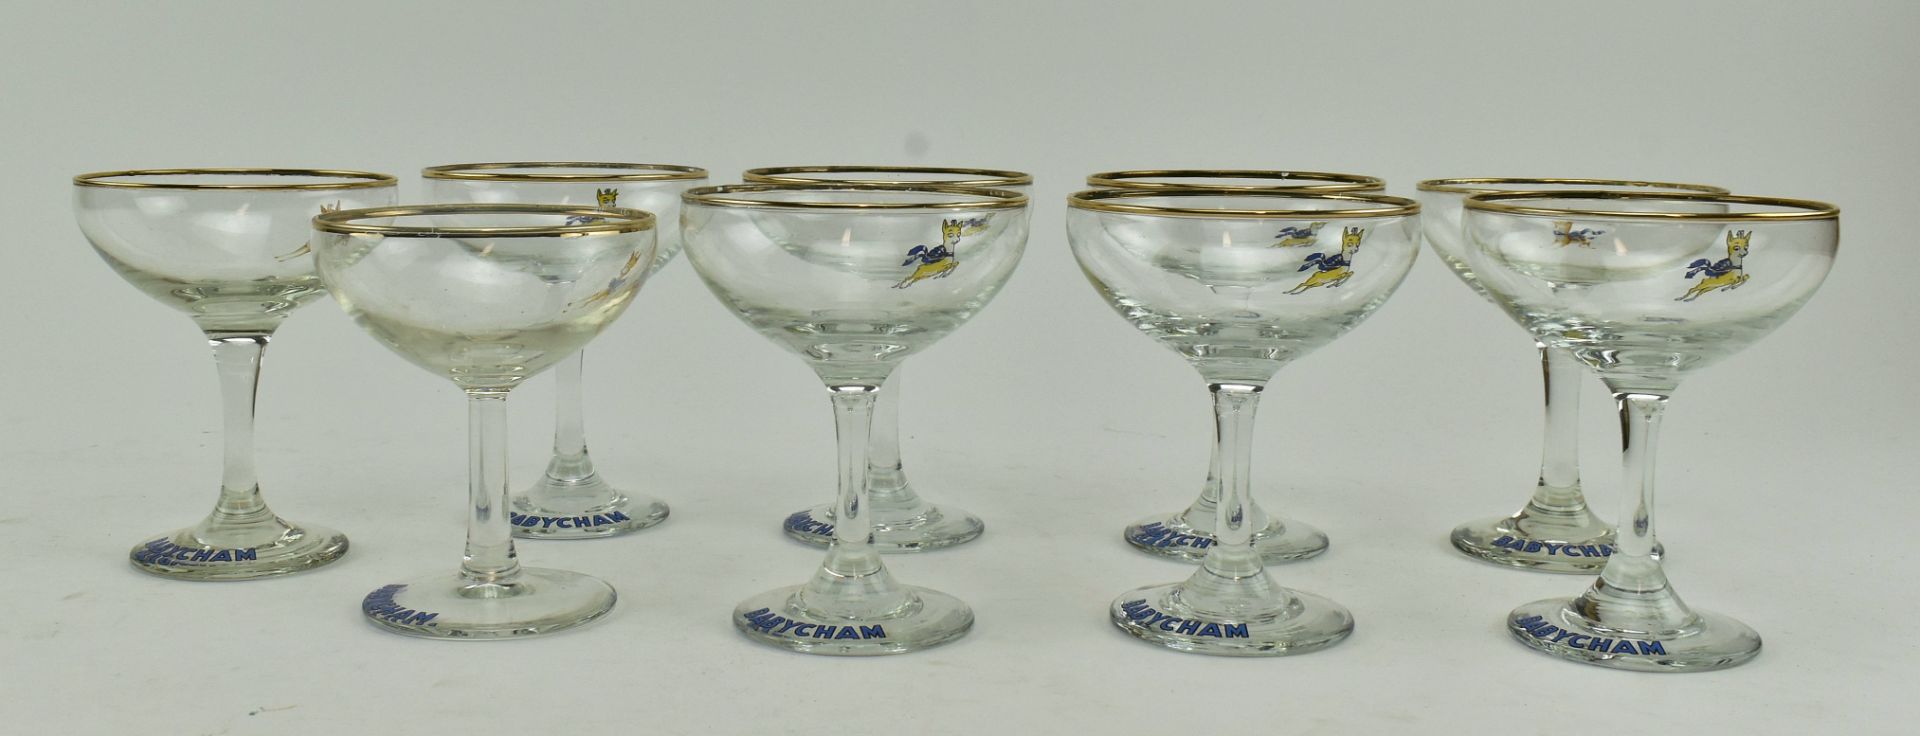 BABYCHAM - COLLECTION OF NINE VINTAGE CHAMPAGNE COUPES - Image 2 of 11